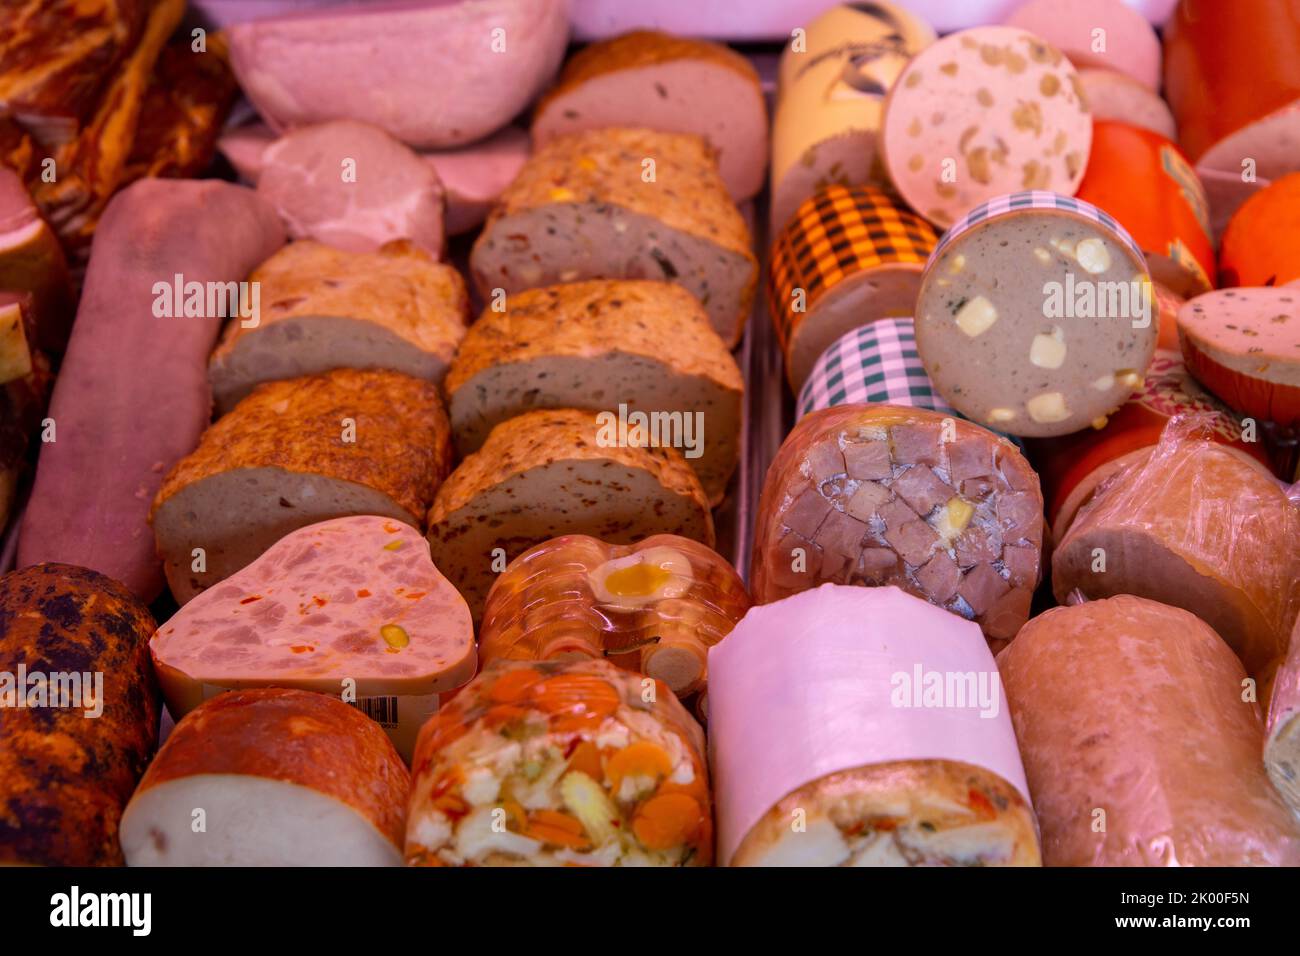 Sausage counter in a butchers shop Stock Photo